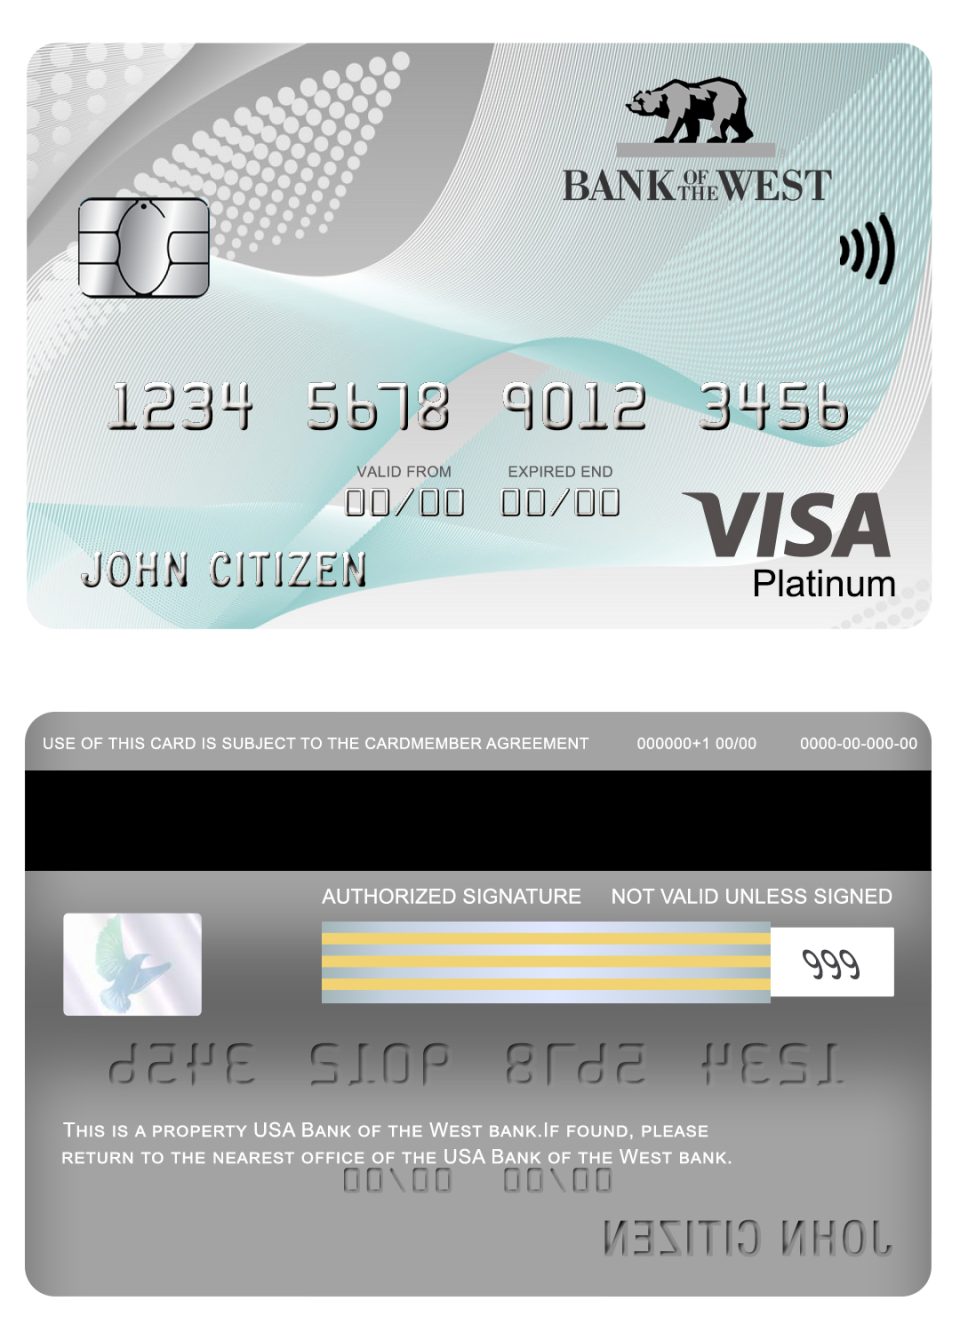 Editable USA Bank of the West bank visa platinum card Templates in PSD Format